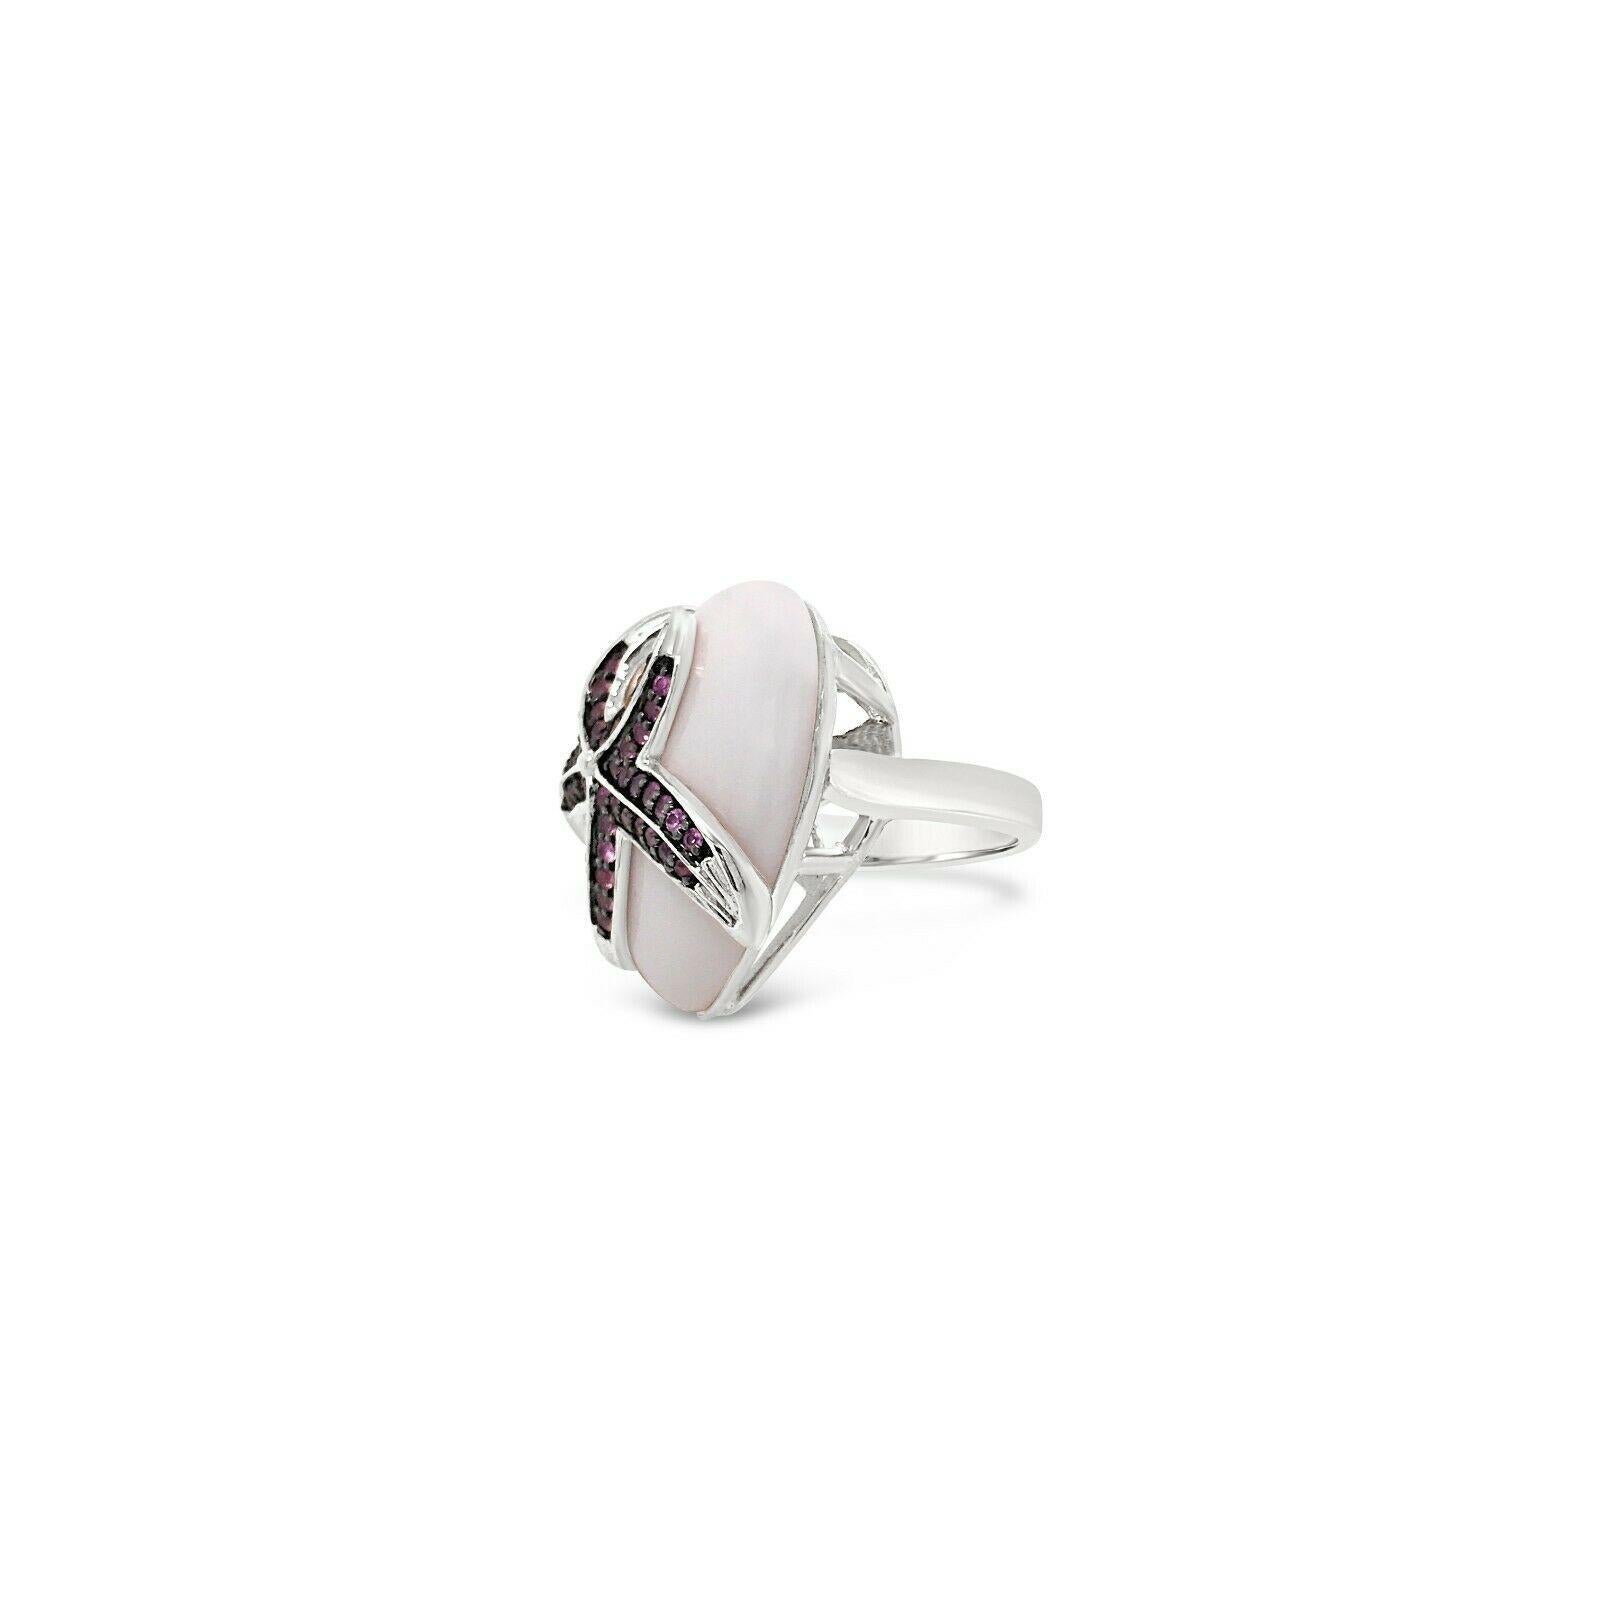 Carlo Viani® Ring featuring 5/8 cts. Bubble Gum Pink Sapphire™, White Agate, set in SLV
Diamonds Breakdown:
None

Gems Breakdown:

26x25mm White Agate
5/8 cts Pink Sapphire



Please feel free to reach out with any questions!

Item comes with a